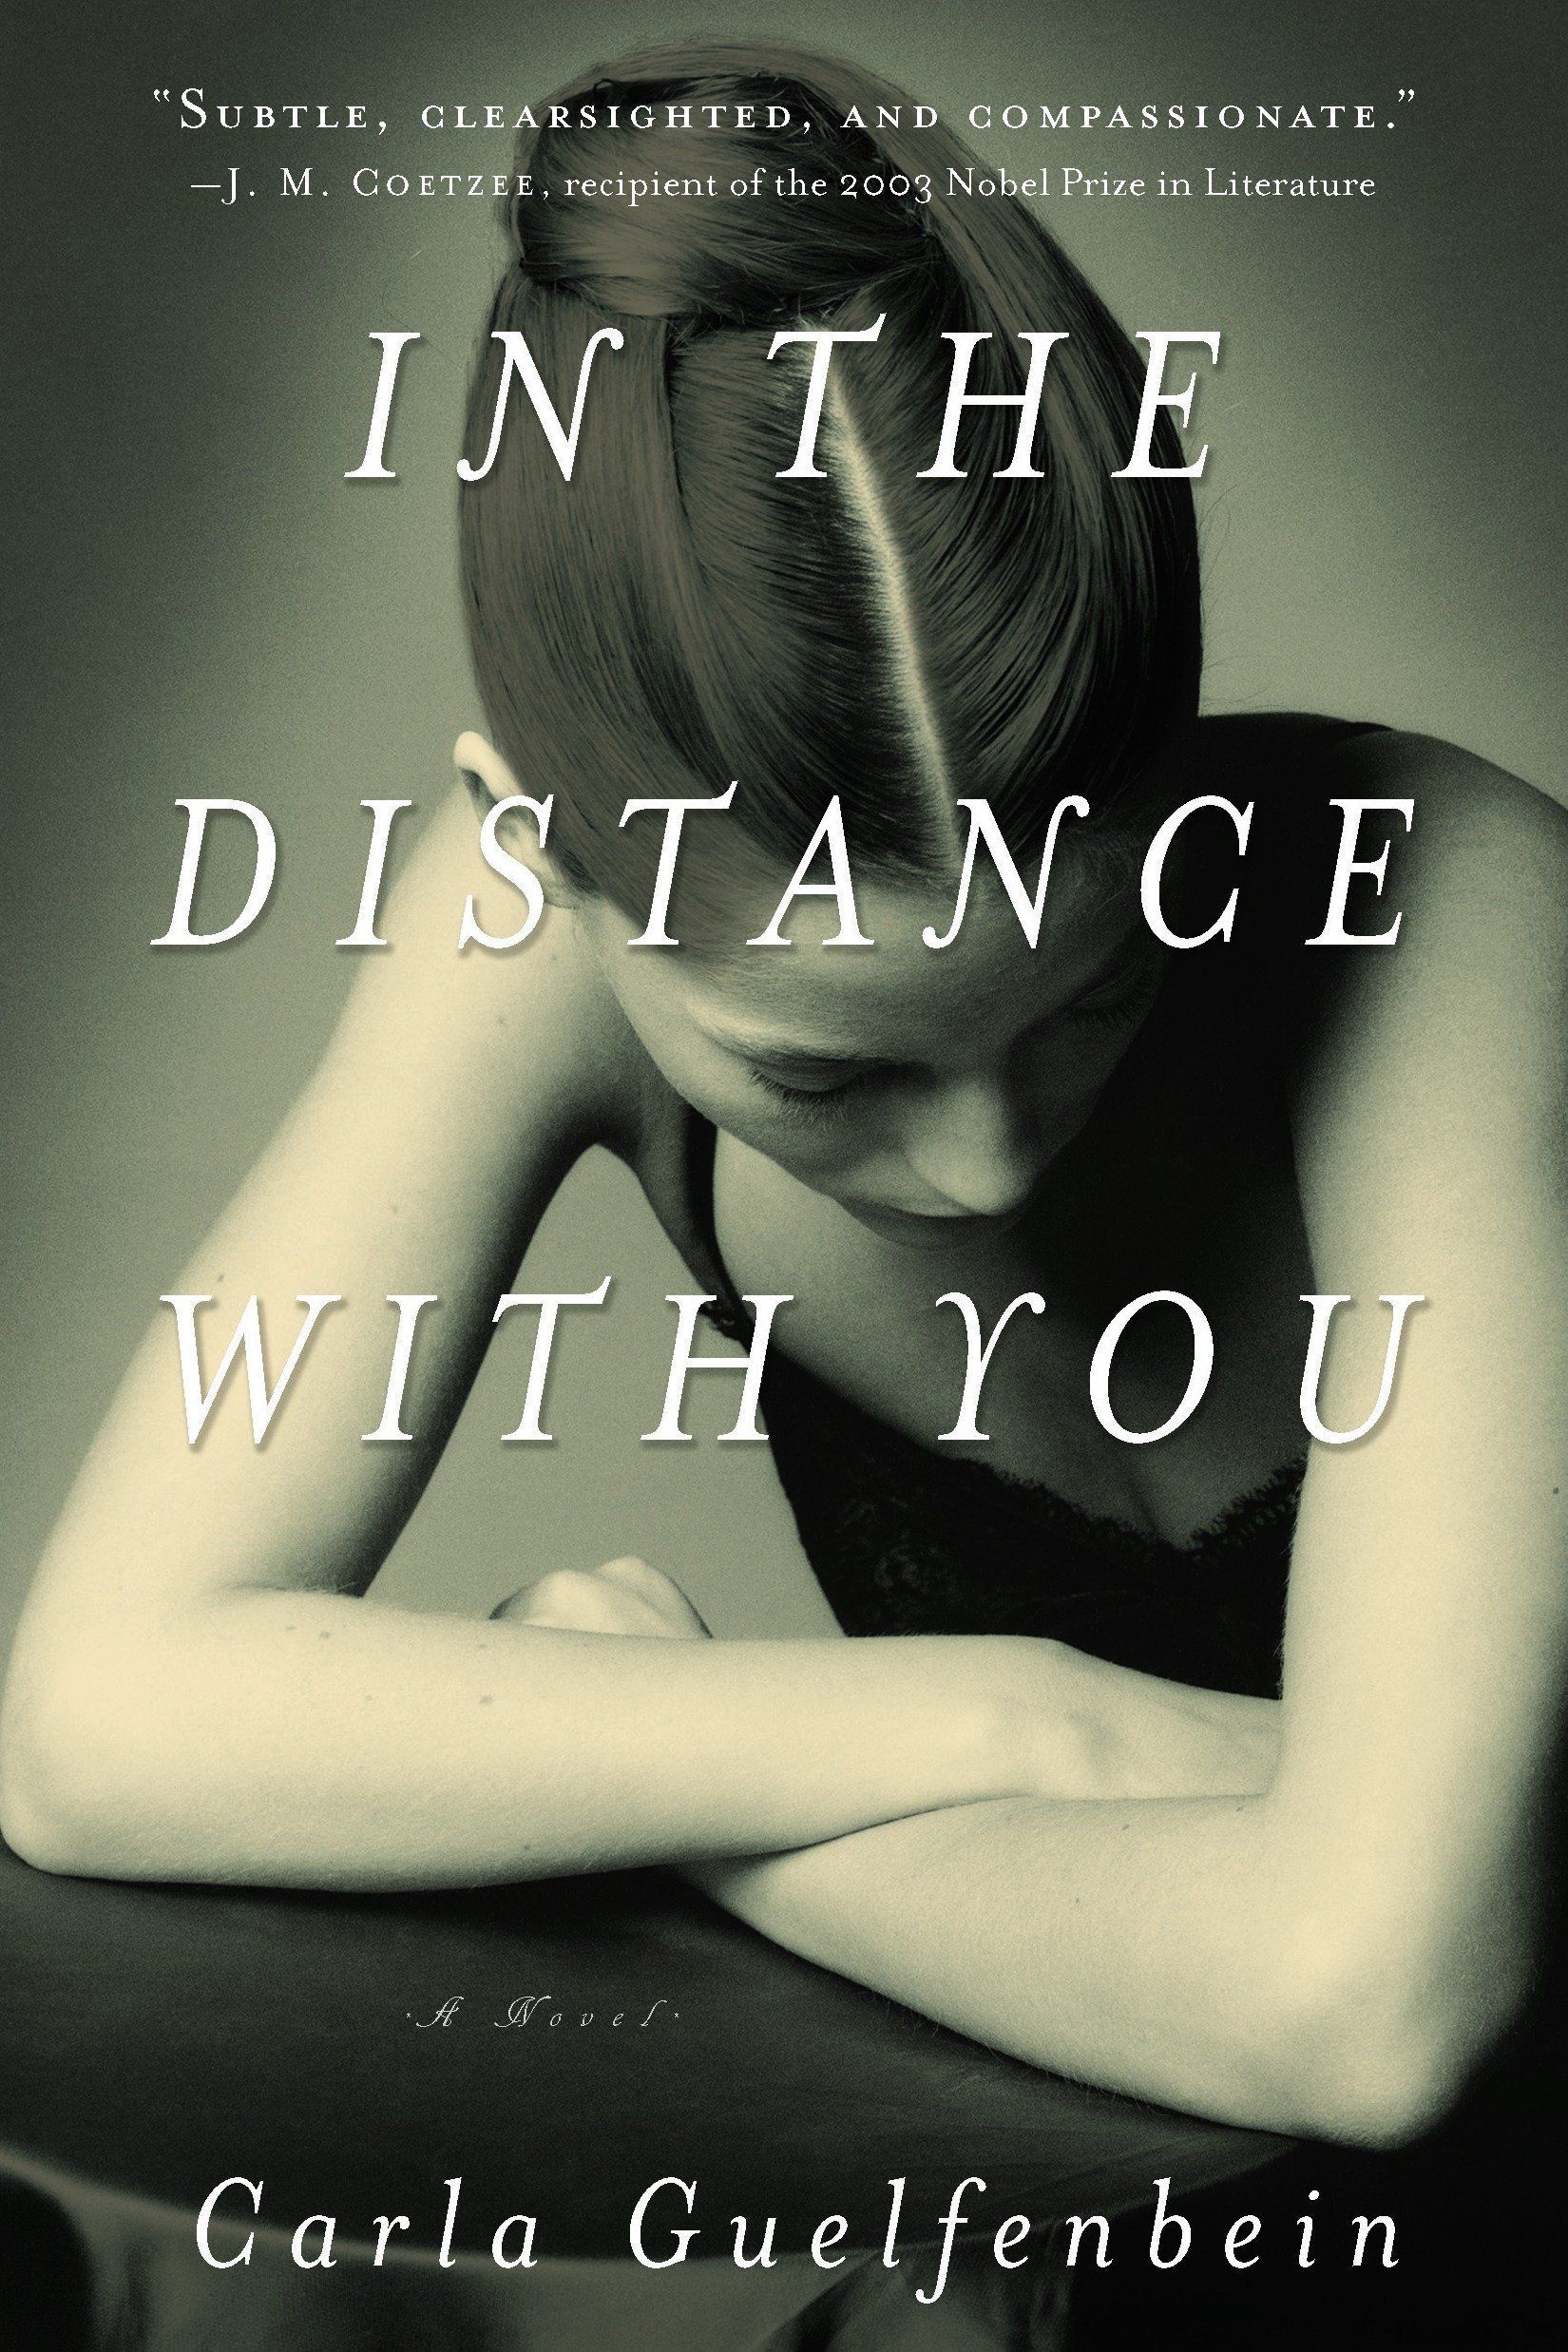 Messy Human Beings: On “In the Distance with You”